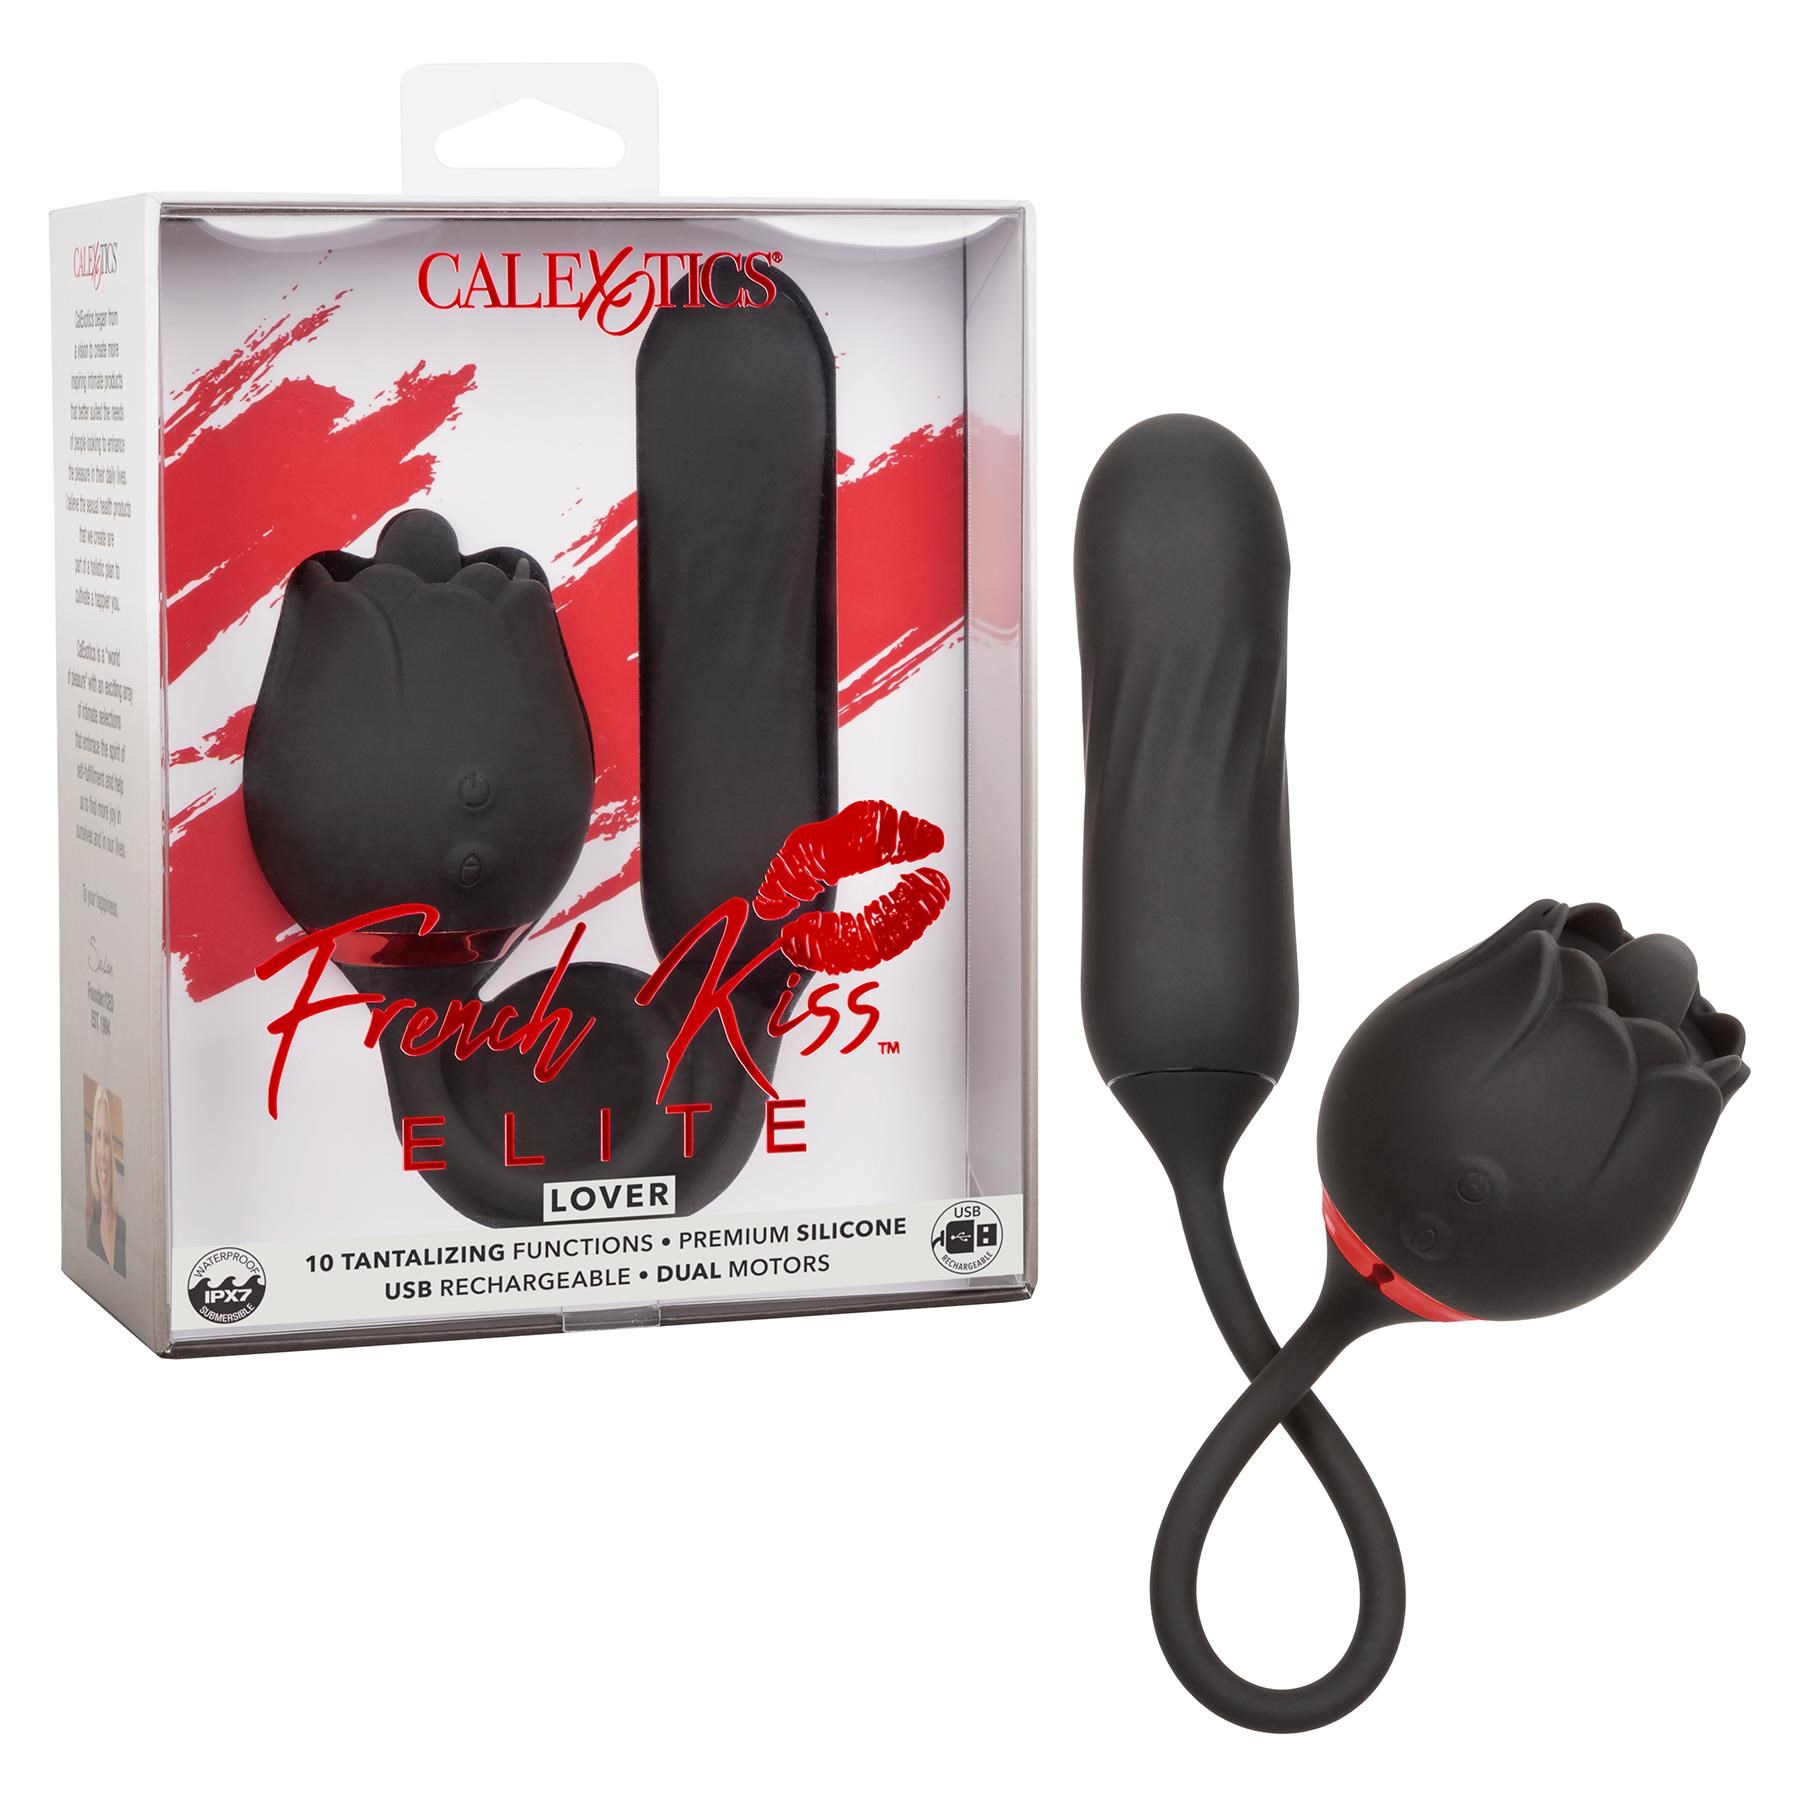 French Kiss Elite Lover Clitorial and Rotating Anal Vibrator - Product and Packaging